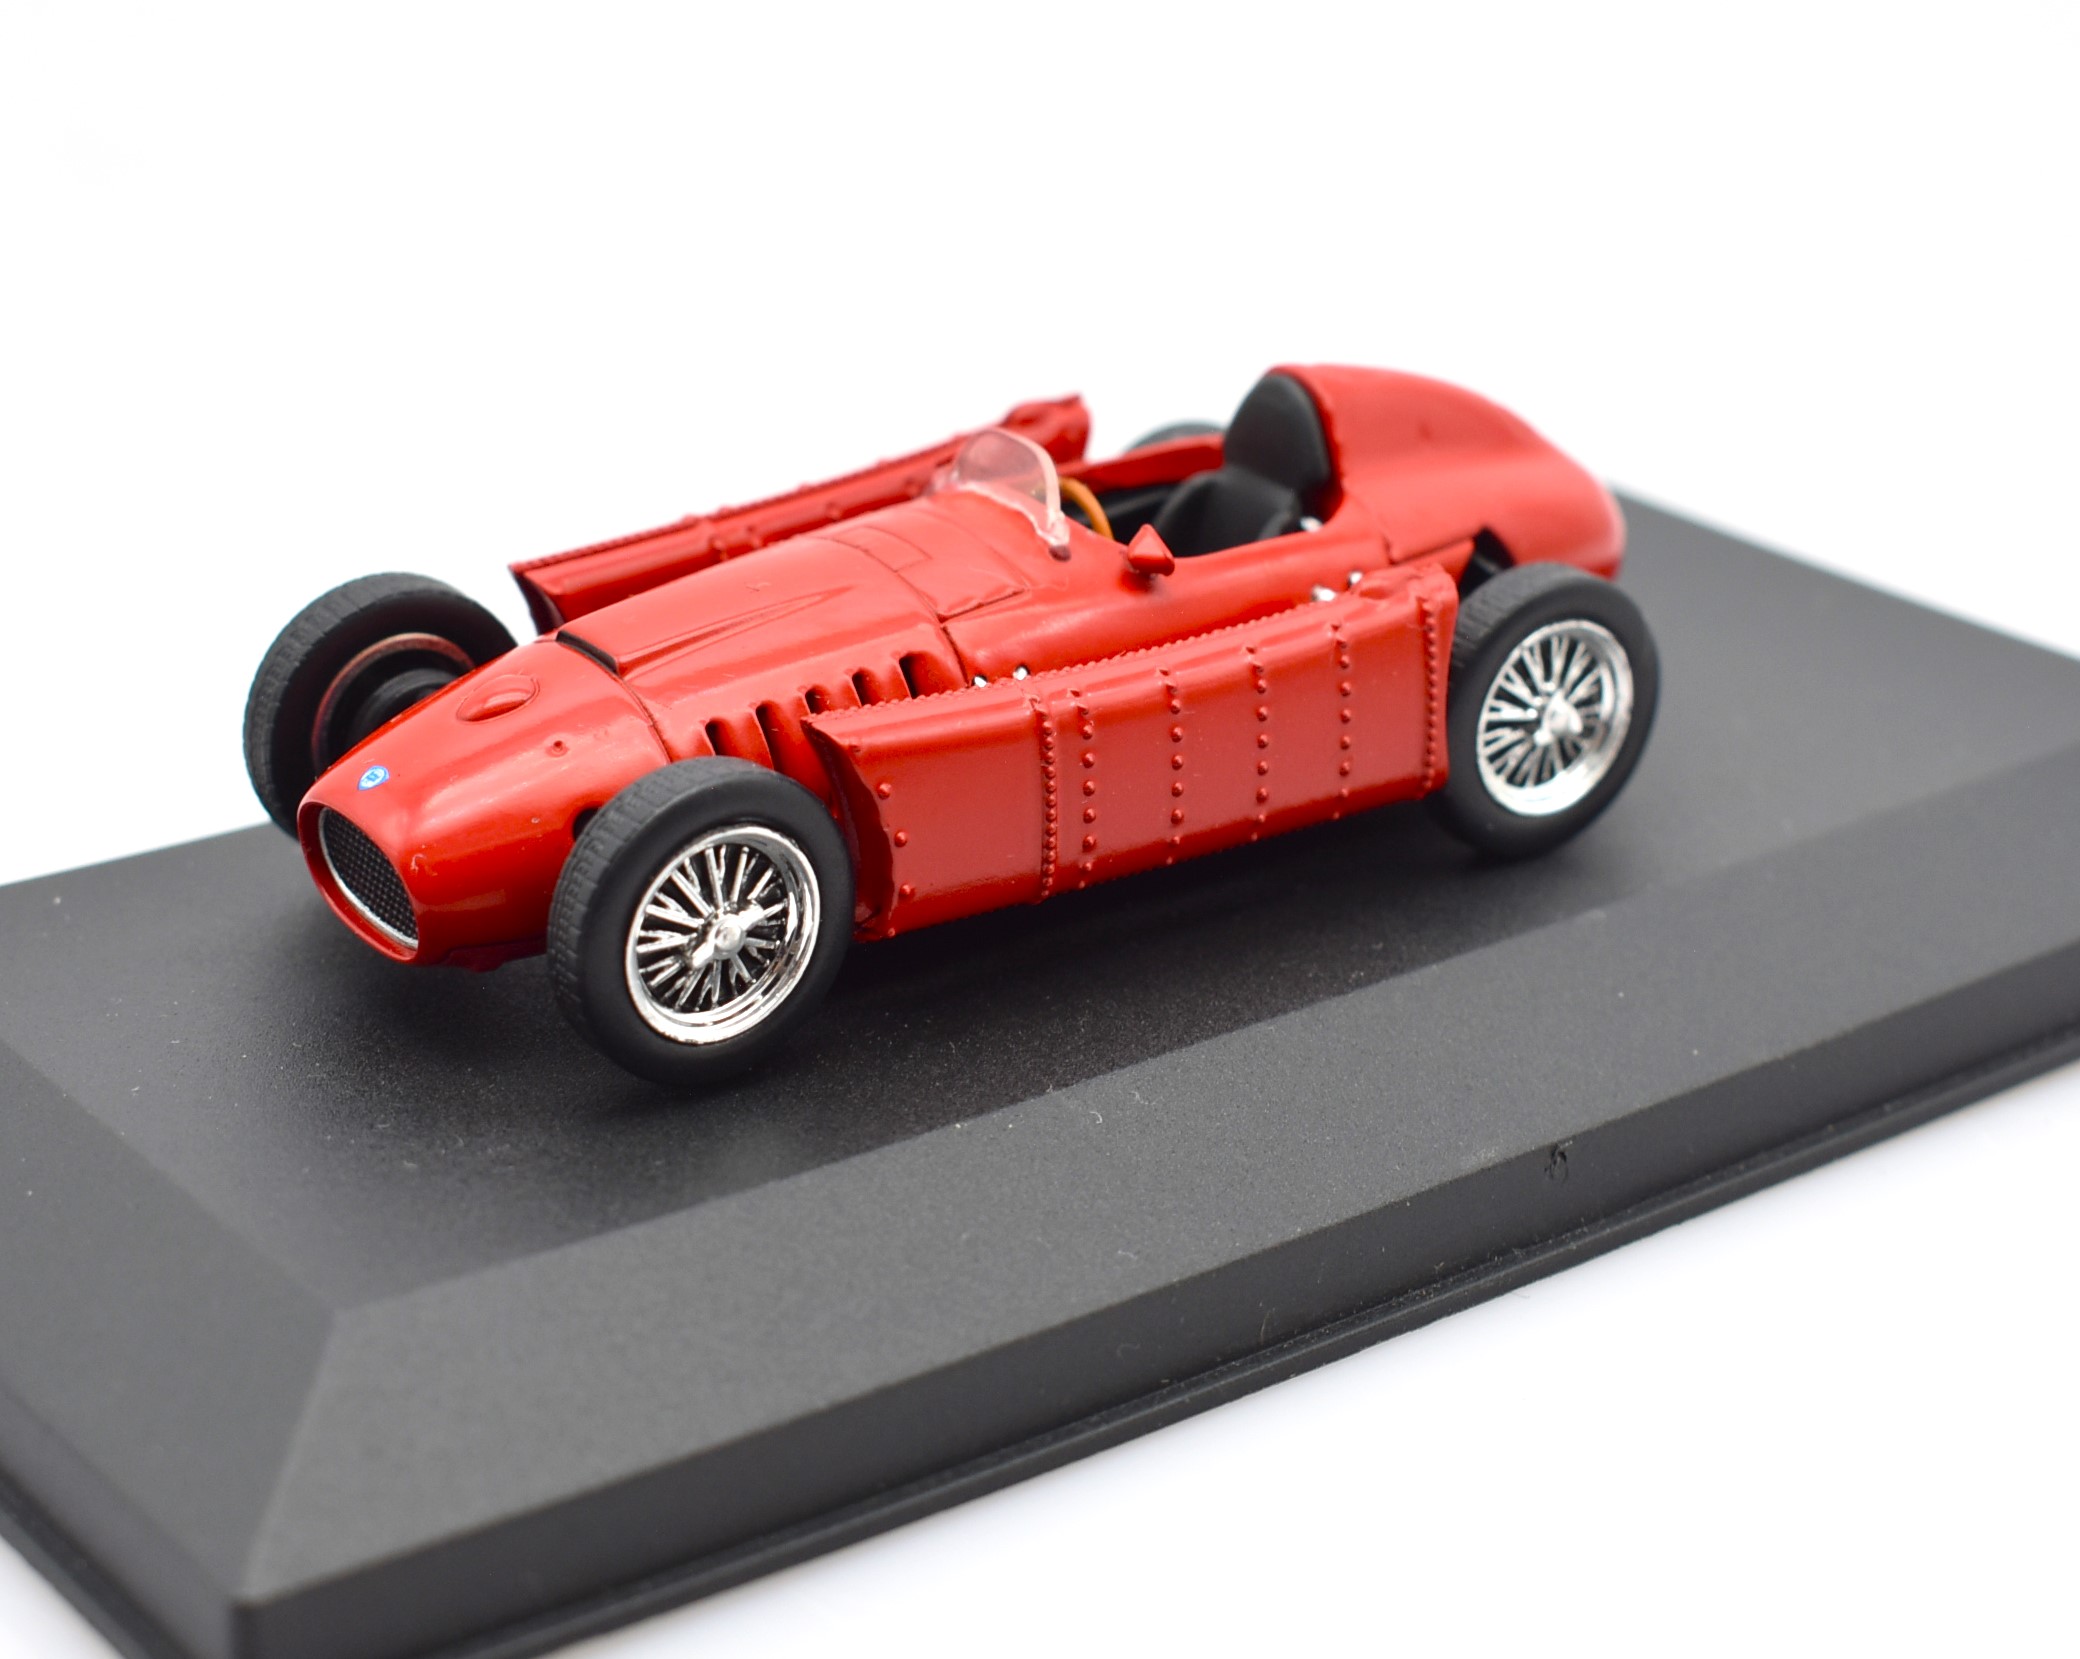 formula 1 collection model cars 1:43 scalelancia D50 F1diecastvehicles